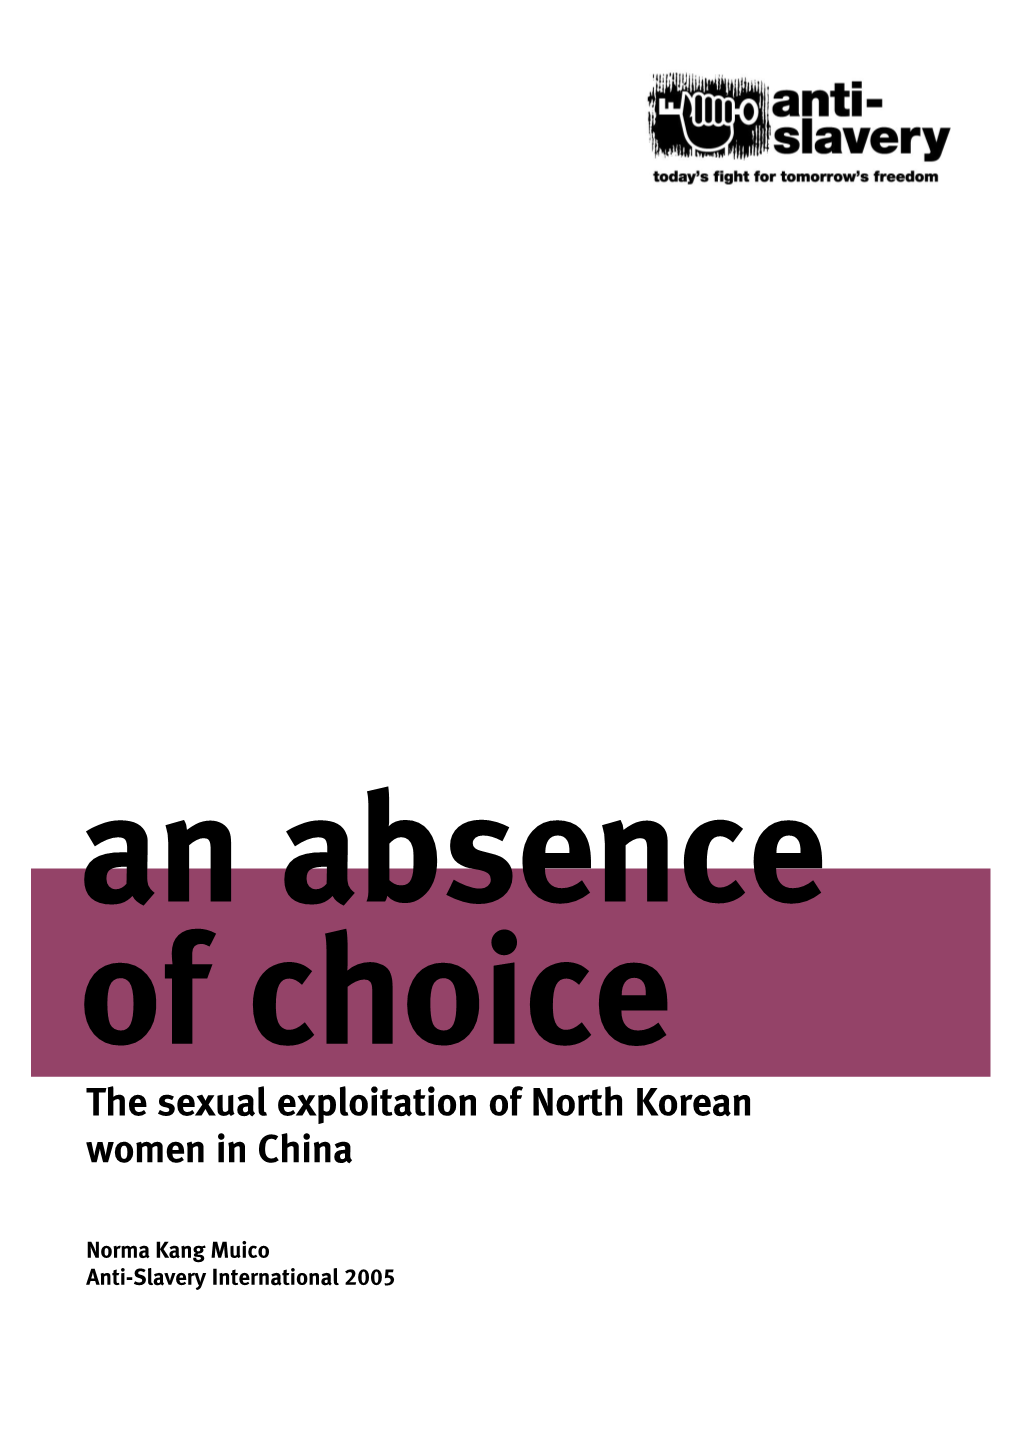 The Sexual Exploitation of North Korean Women in China